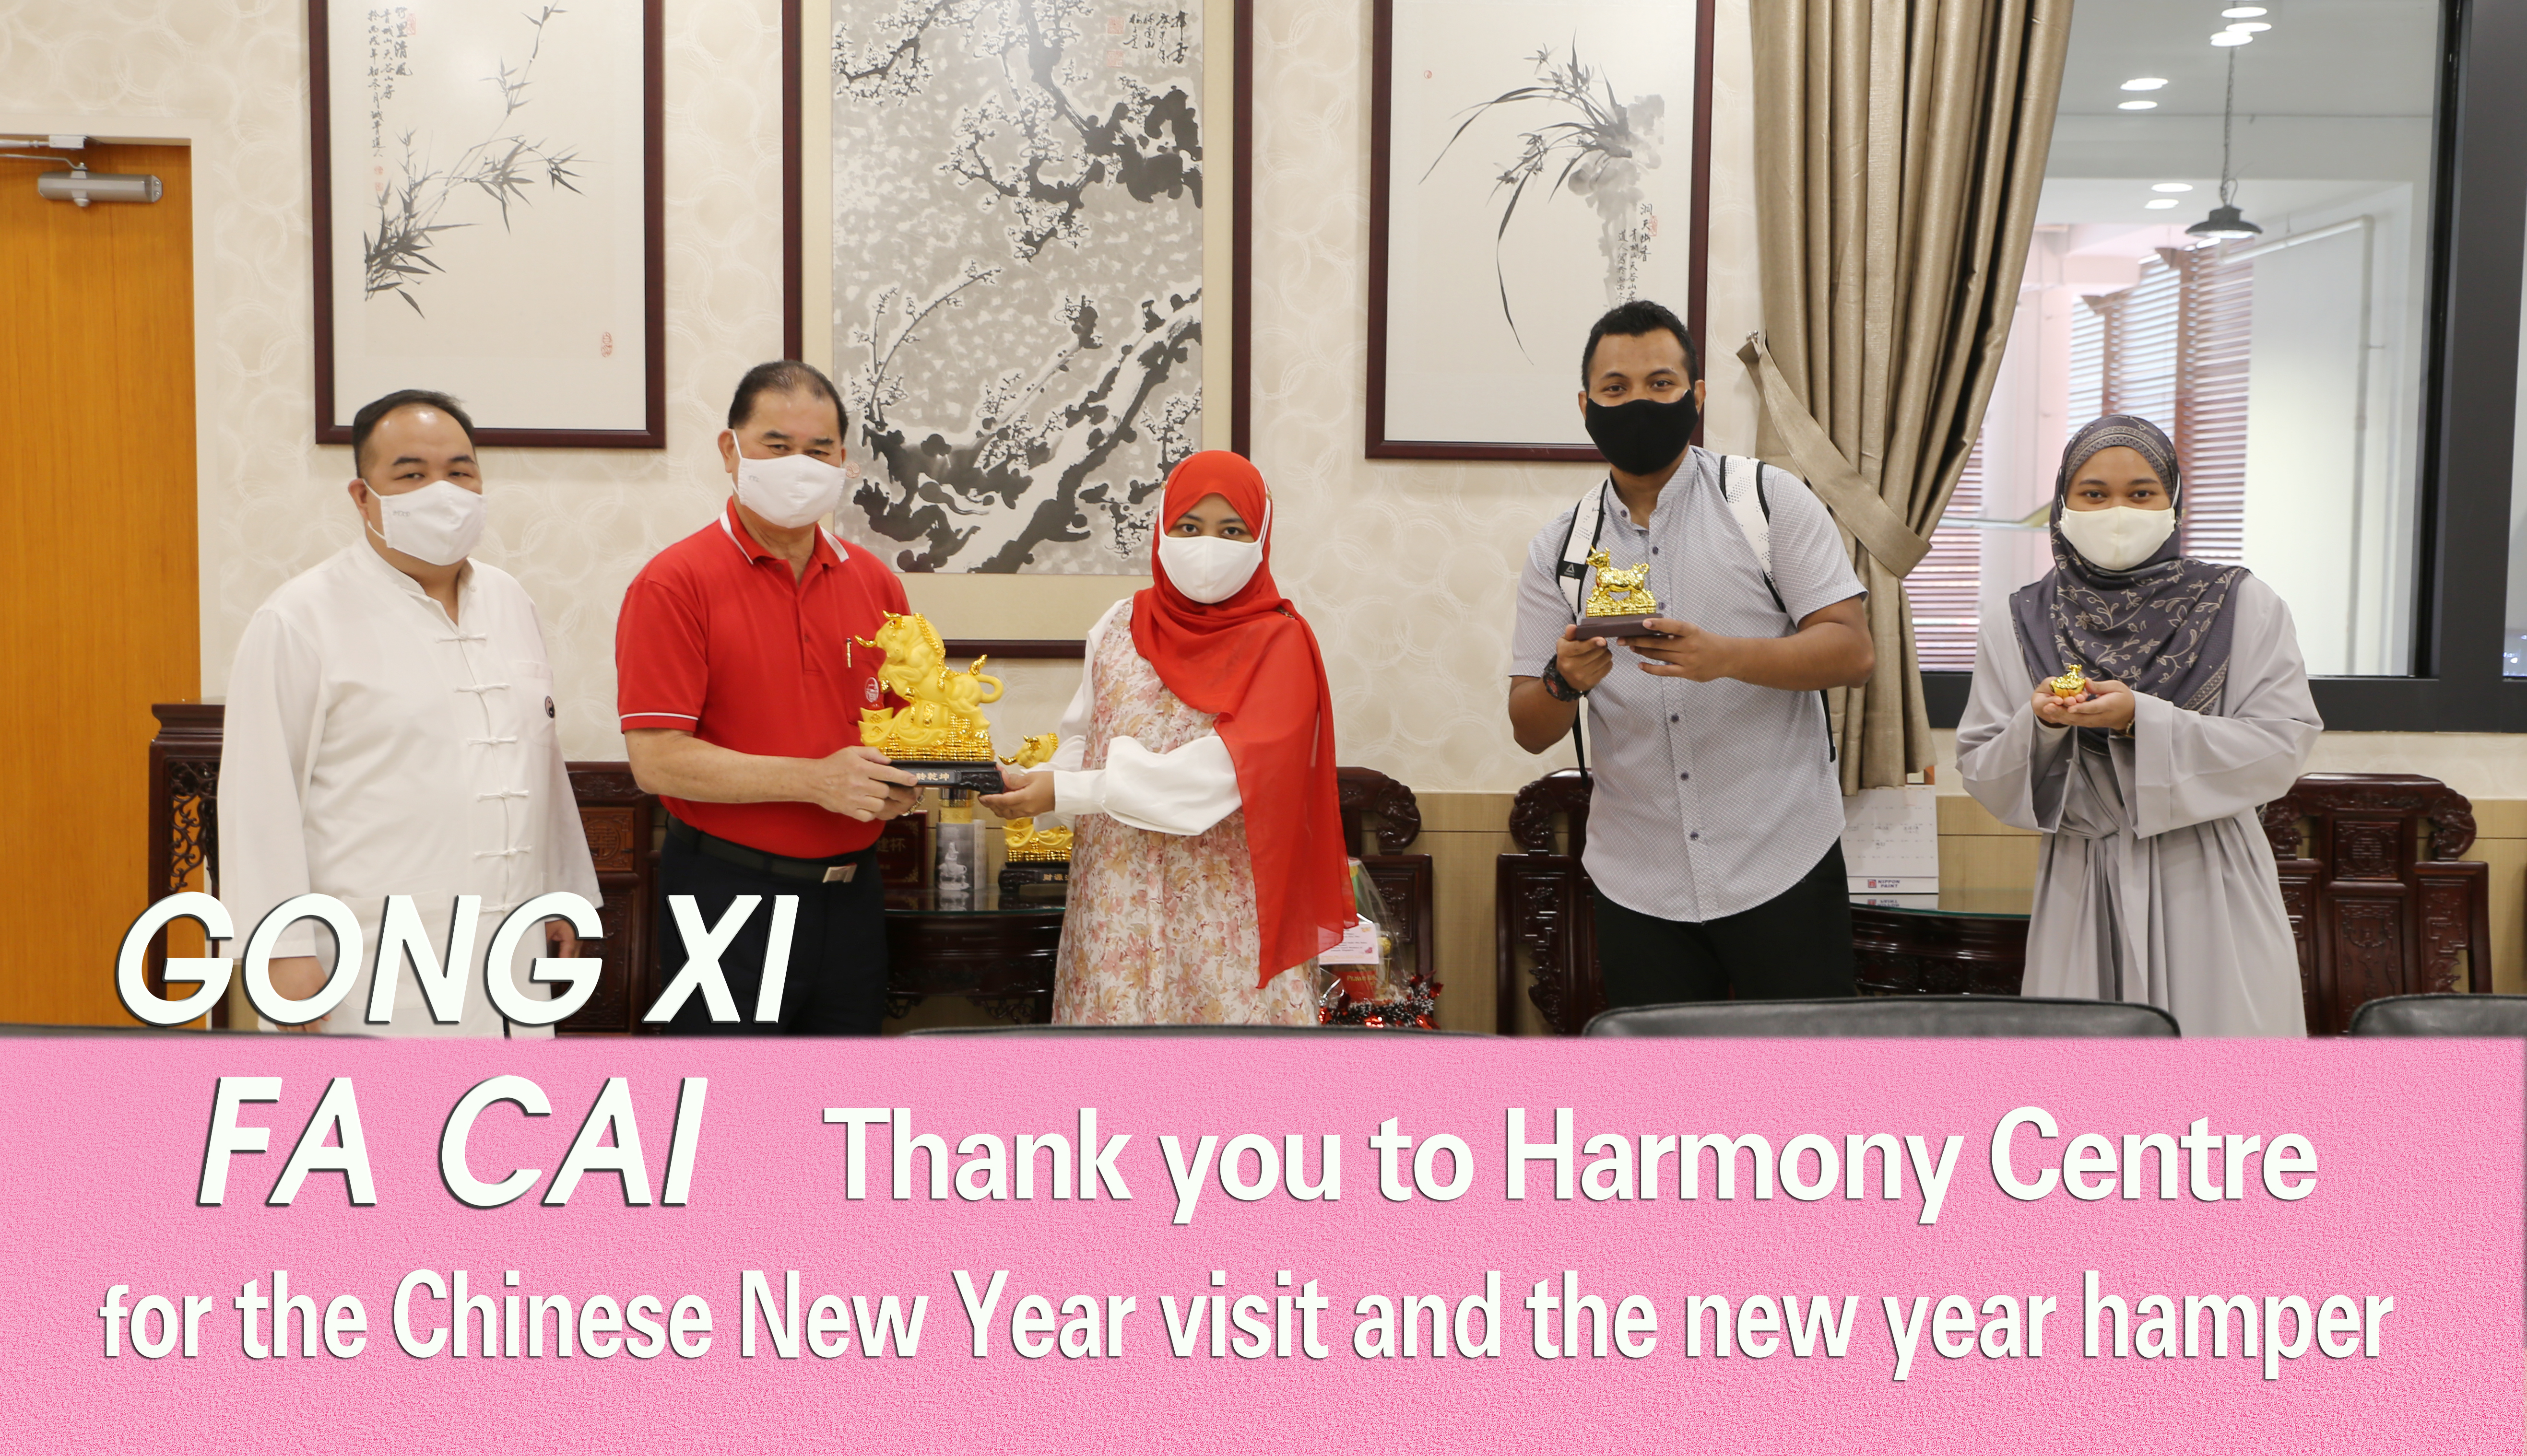 GONG XI FA CAI Thank you to Harmony Centre for the Chinese New Year visit and the new year hamper